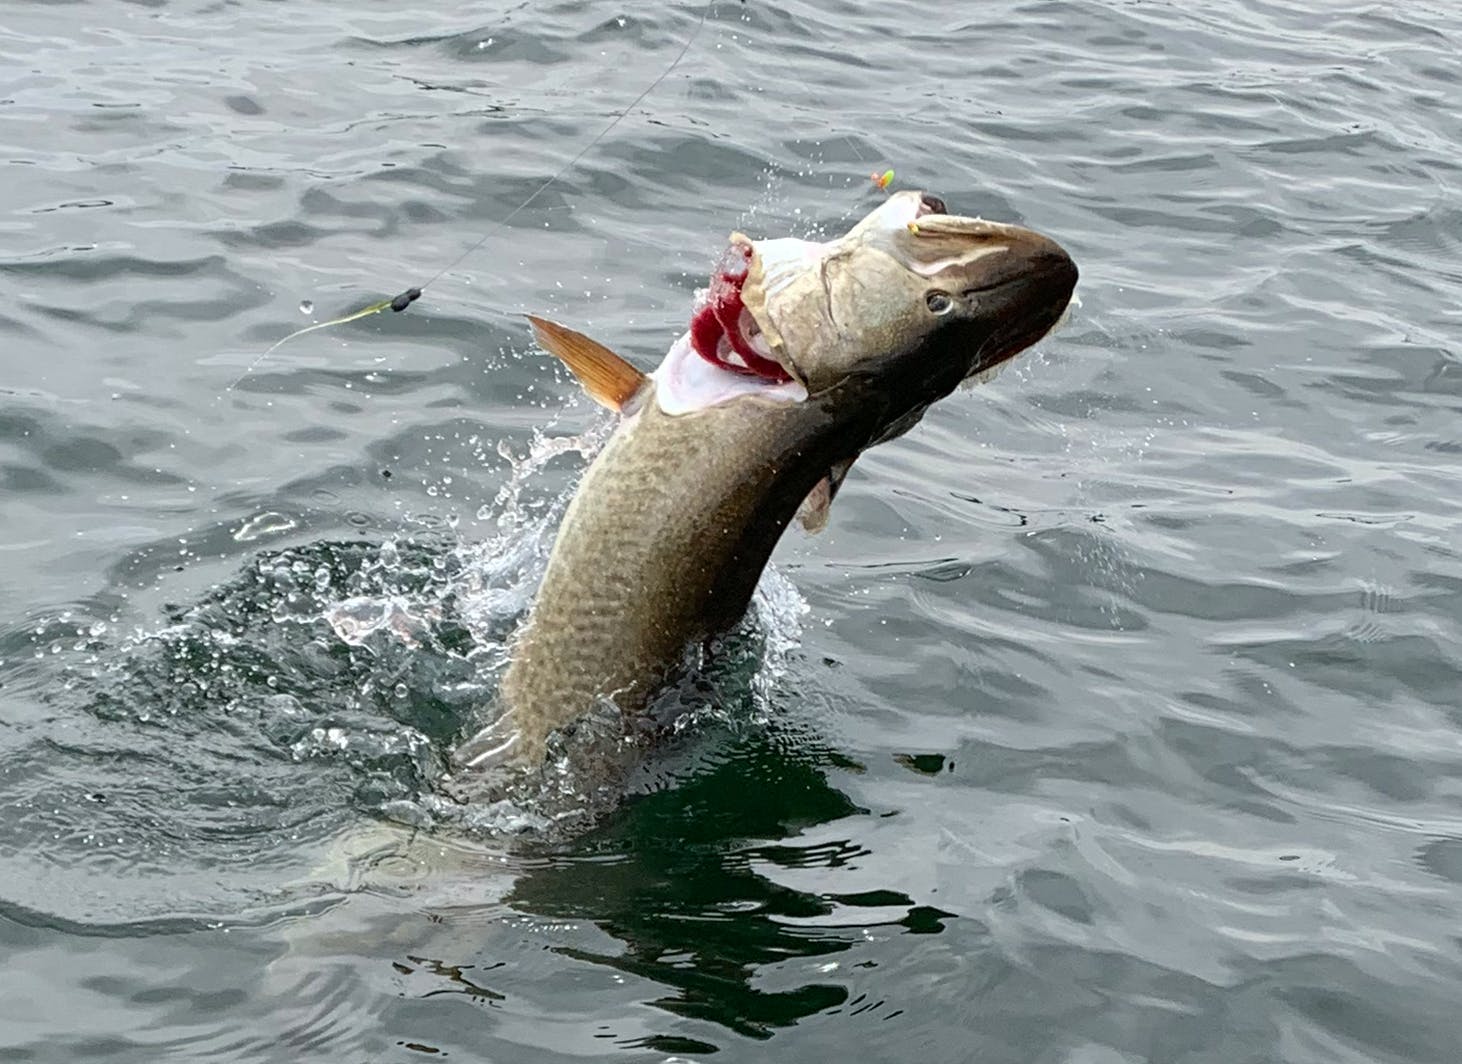 Minnesota Angler Hooks Walleye and Muskie With One Cast